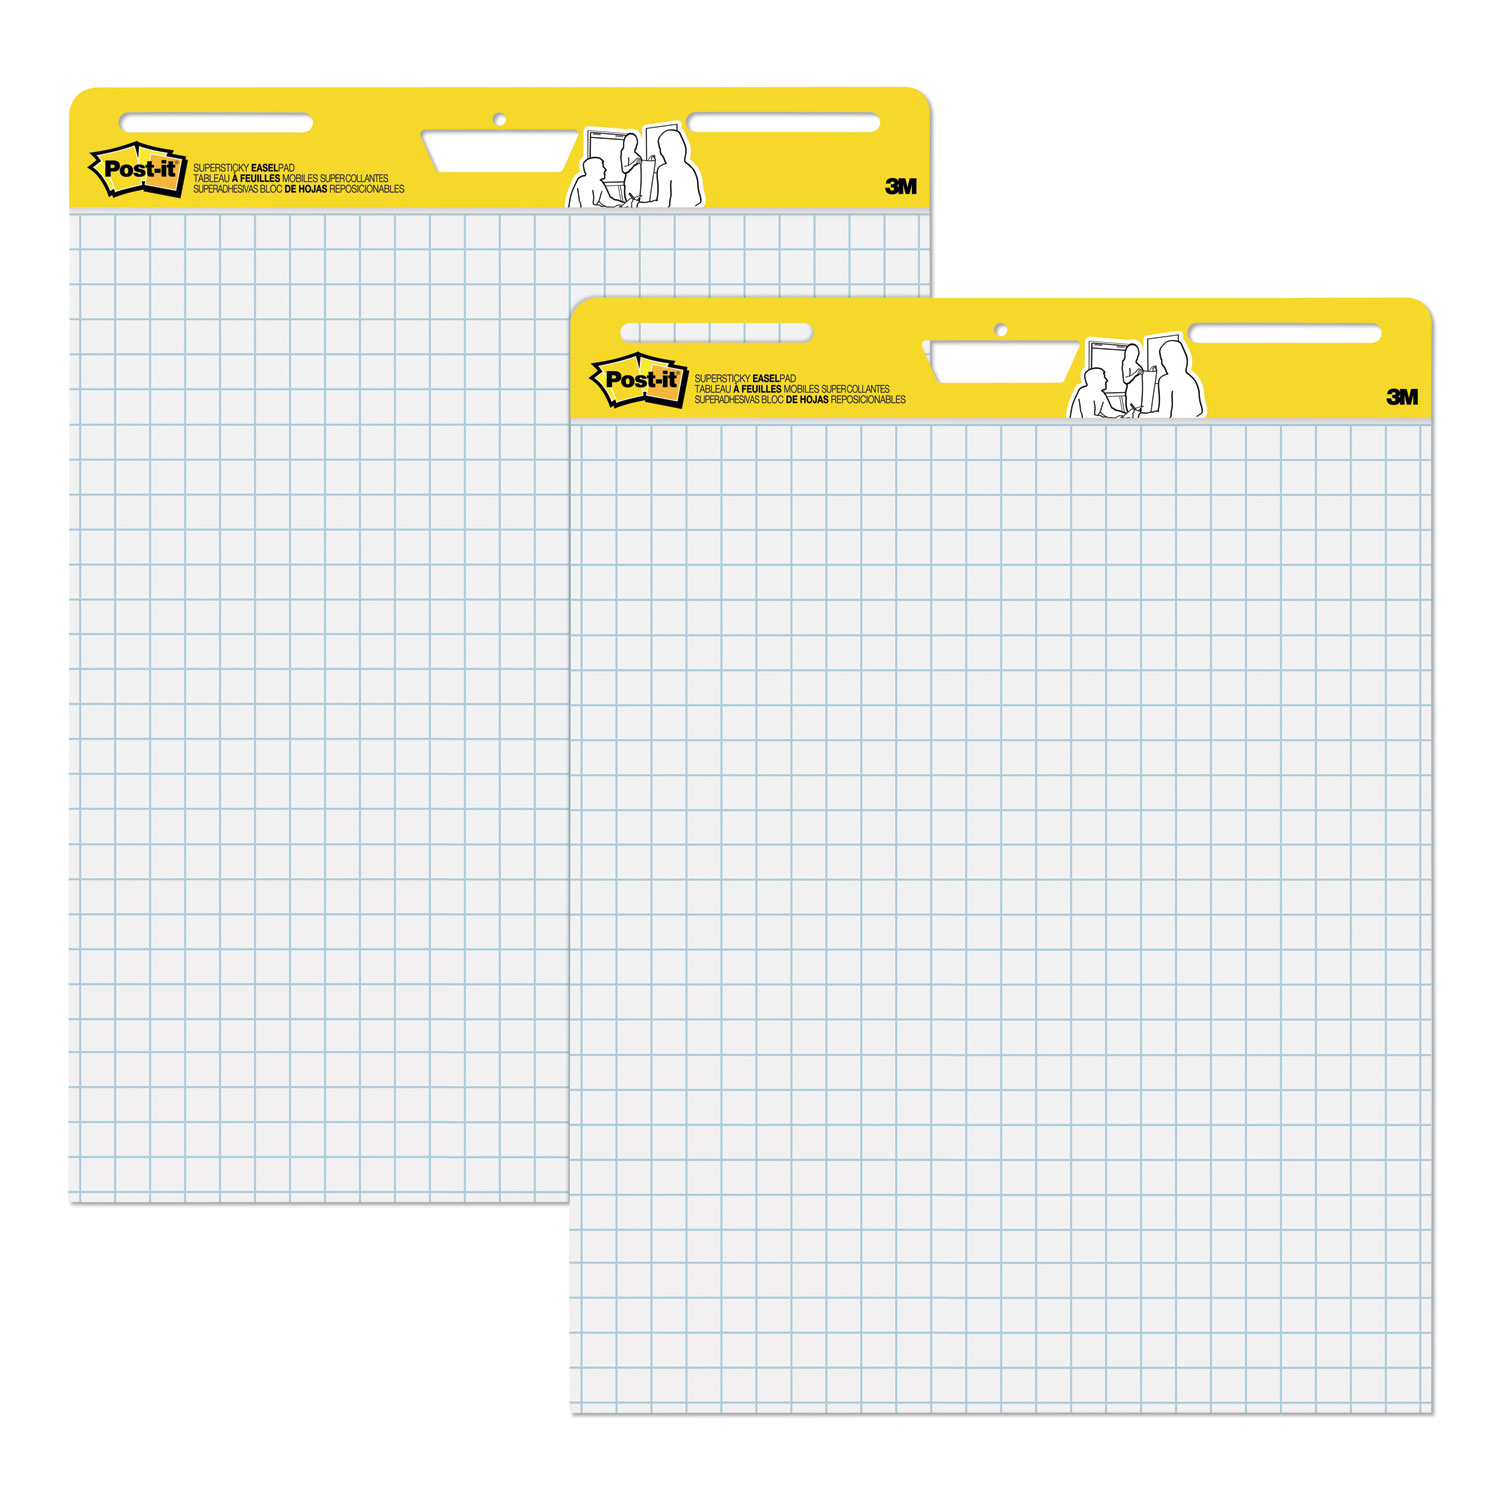  Post-it Easel Pads Super Sticky 560 Self-Stick Easel Pads, 25 x 30, White, 30 Sheets, 2/Carton (MMM560) 